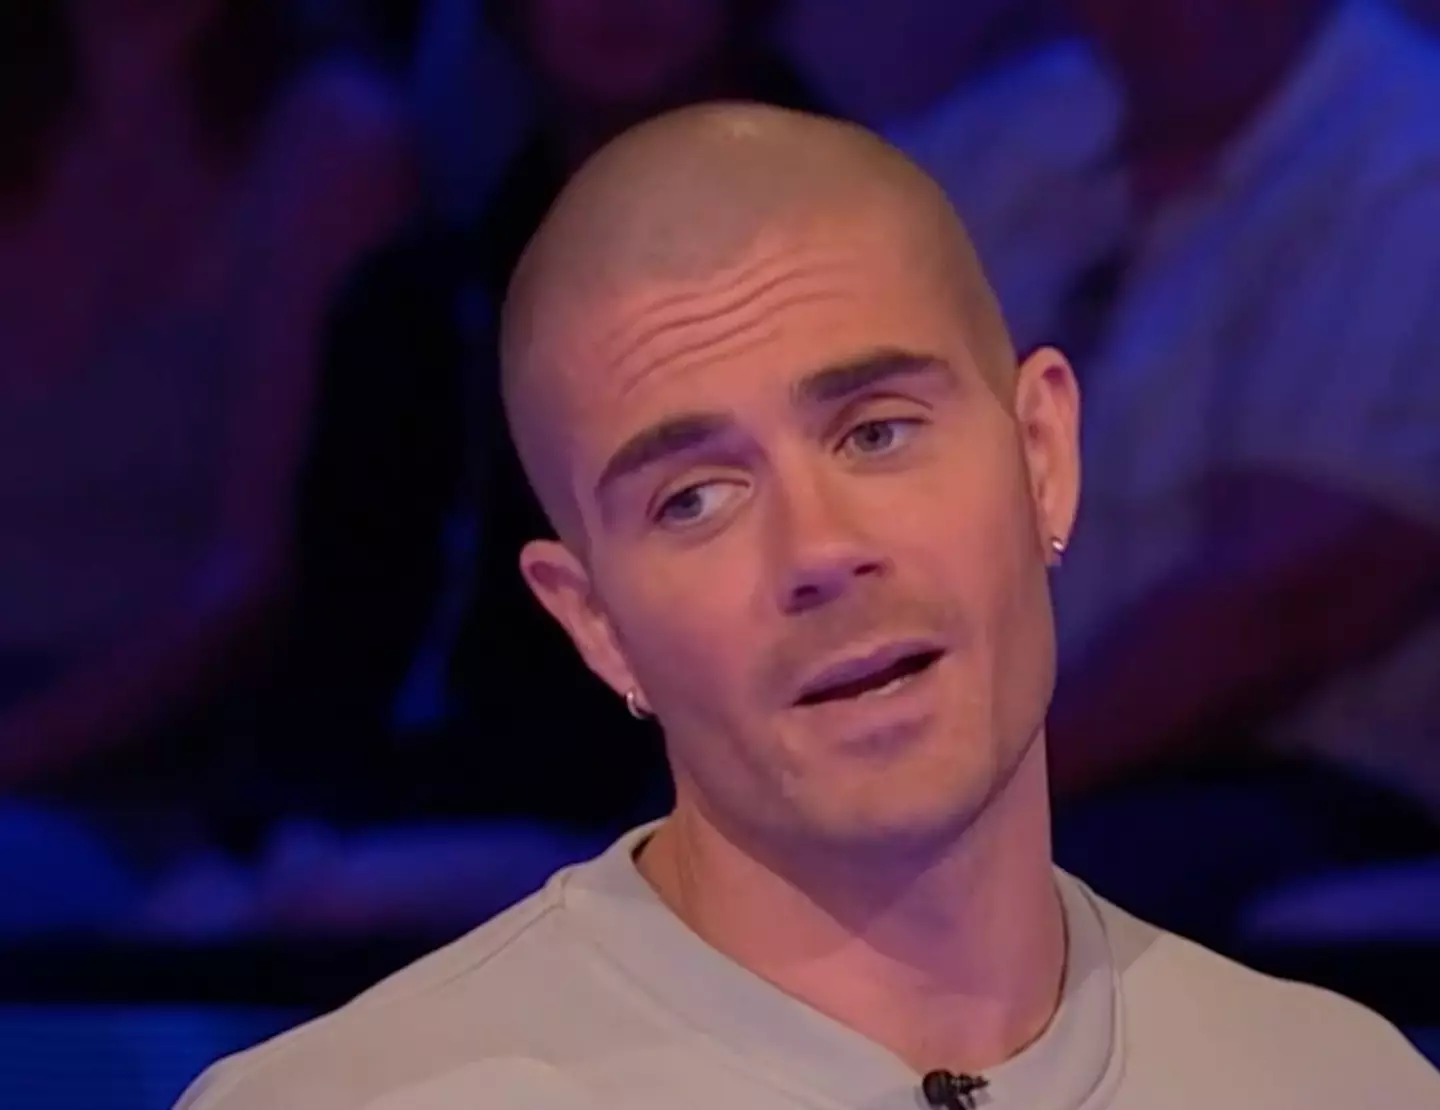 The Wanted's Max George offered a heartfelt tribute for his late bandmate and 'brother' Tom Parker.